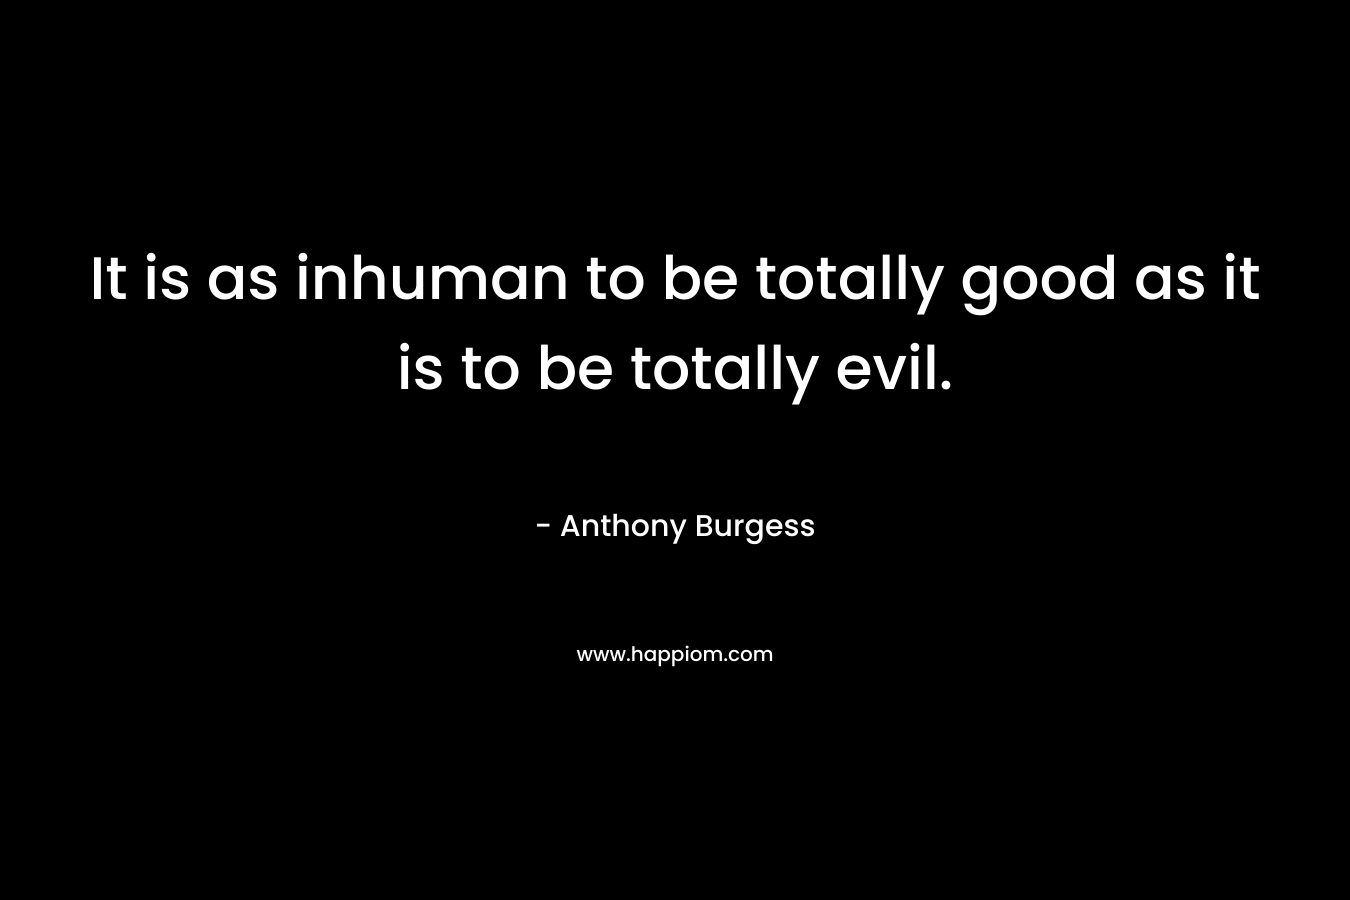 It is as inhuman to be totally good as it is to be totally evil.